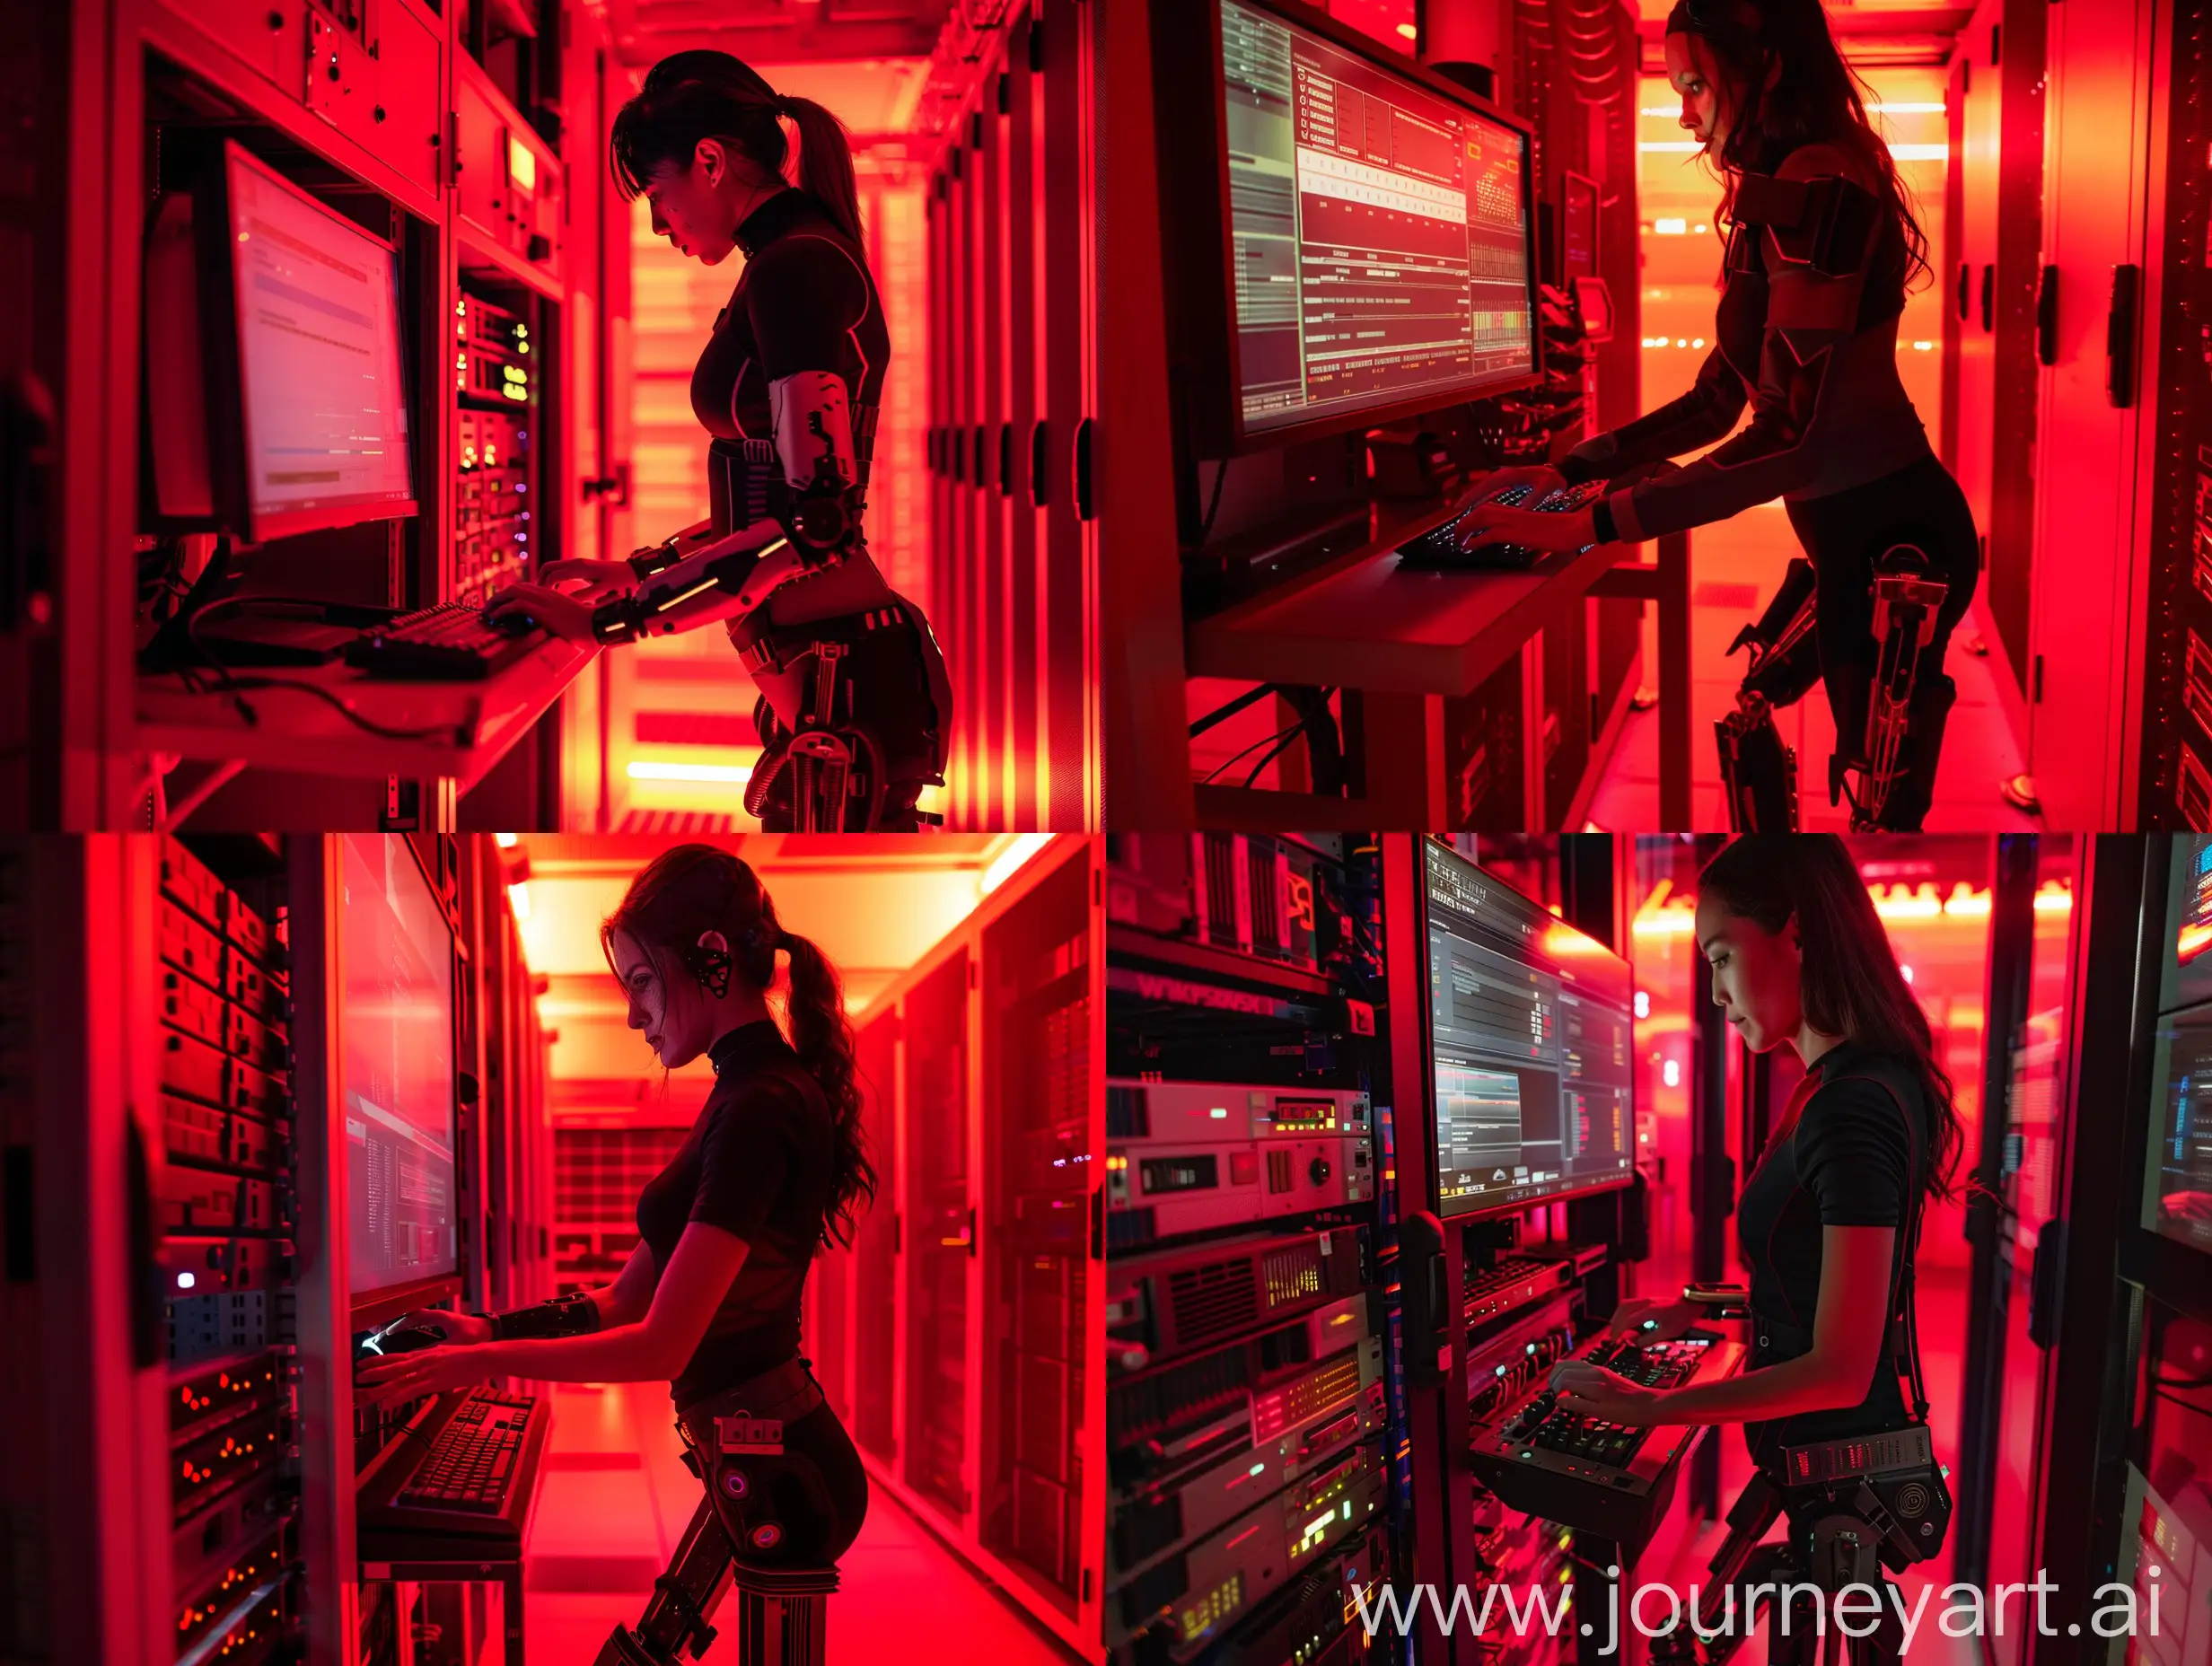 cinematic symmetrical scene, we see a woman from a medium distance, cyberpunk woman with prosthetic mecha legs, she is standing, she is typing on a computer, the computer have a large screen, the set is a server room, a red light colors the set